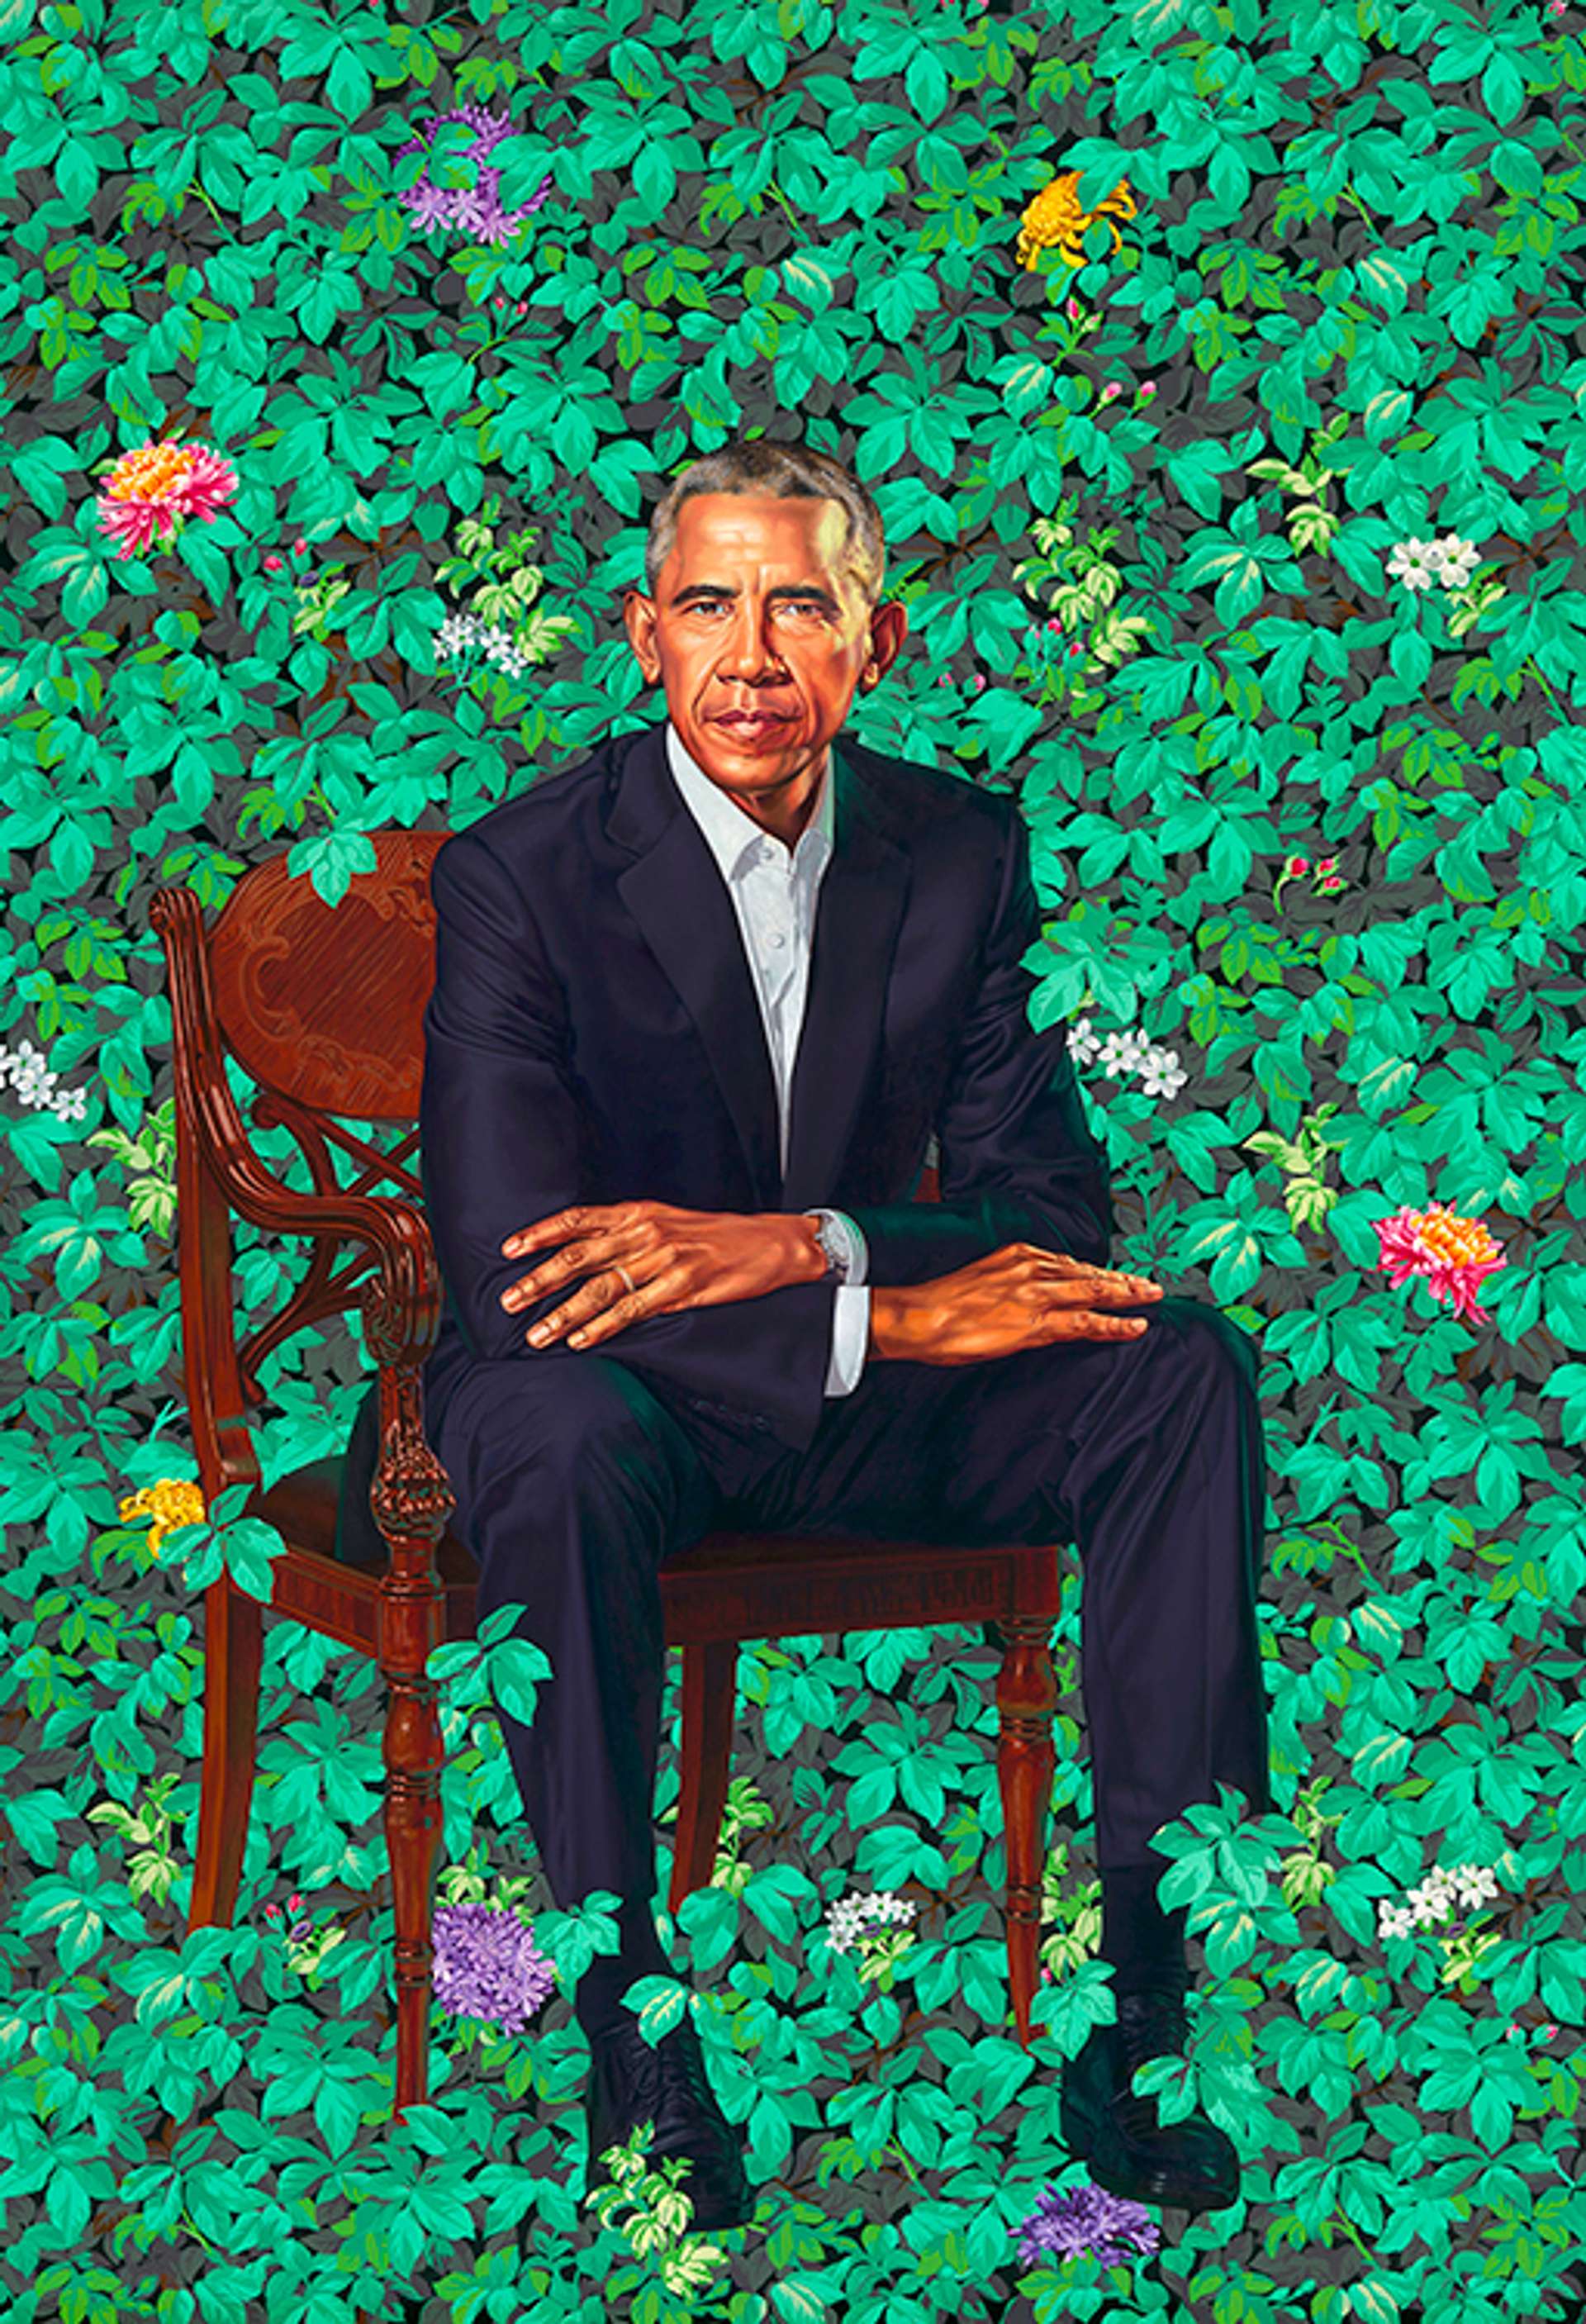 President Barack Obama dressed in a navy blue suit and white shirt, sitting on a wooden chair with his hands in his lap. Lush green leaves and colourful flora populate the background.